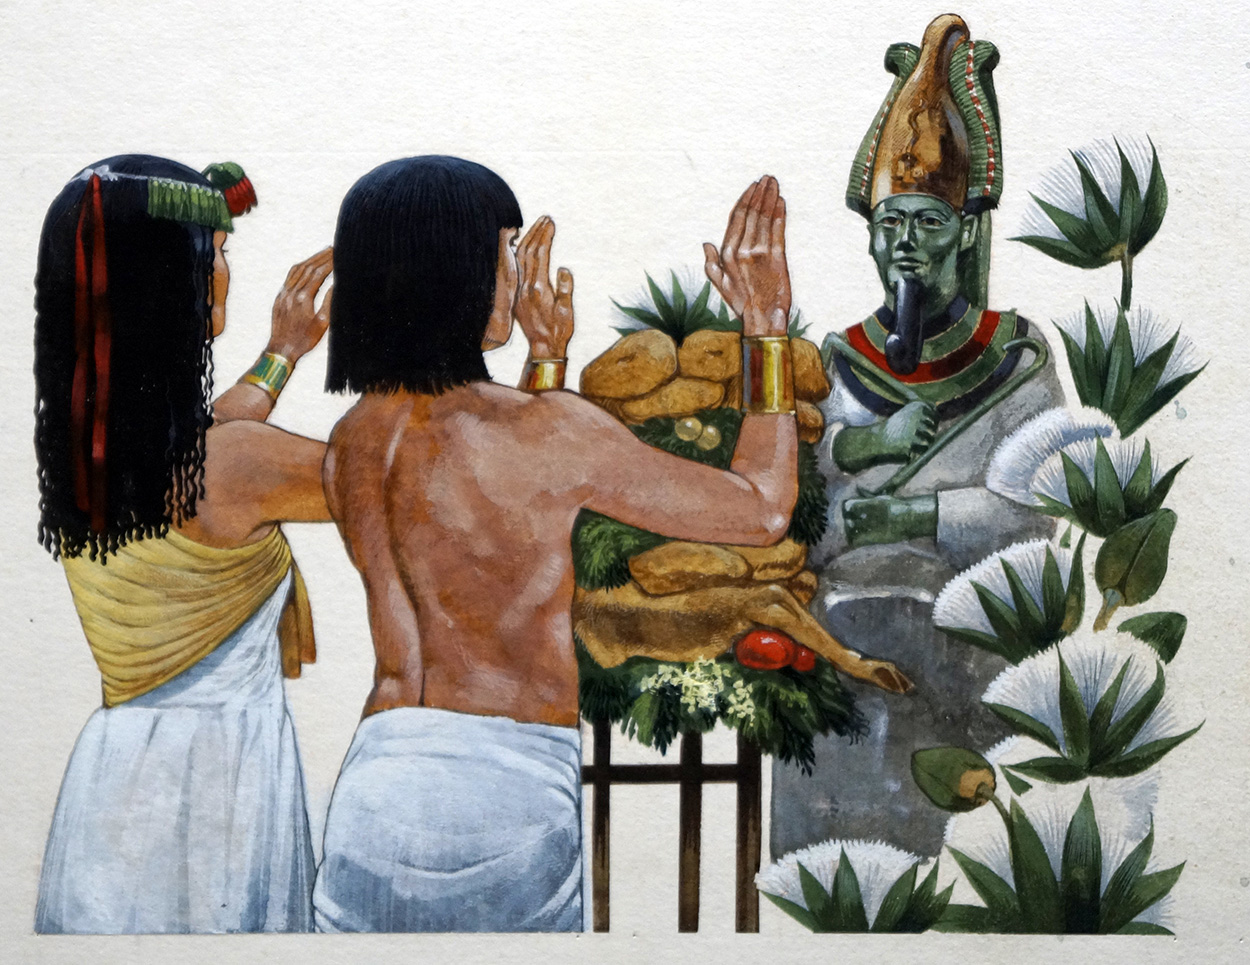 Offerings of food to the God Osiris (Original) art by Richard Hook at The Illustration Art Gallery